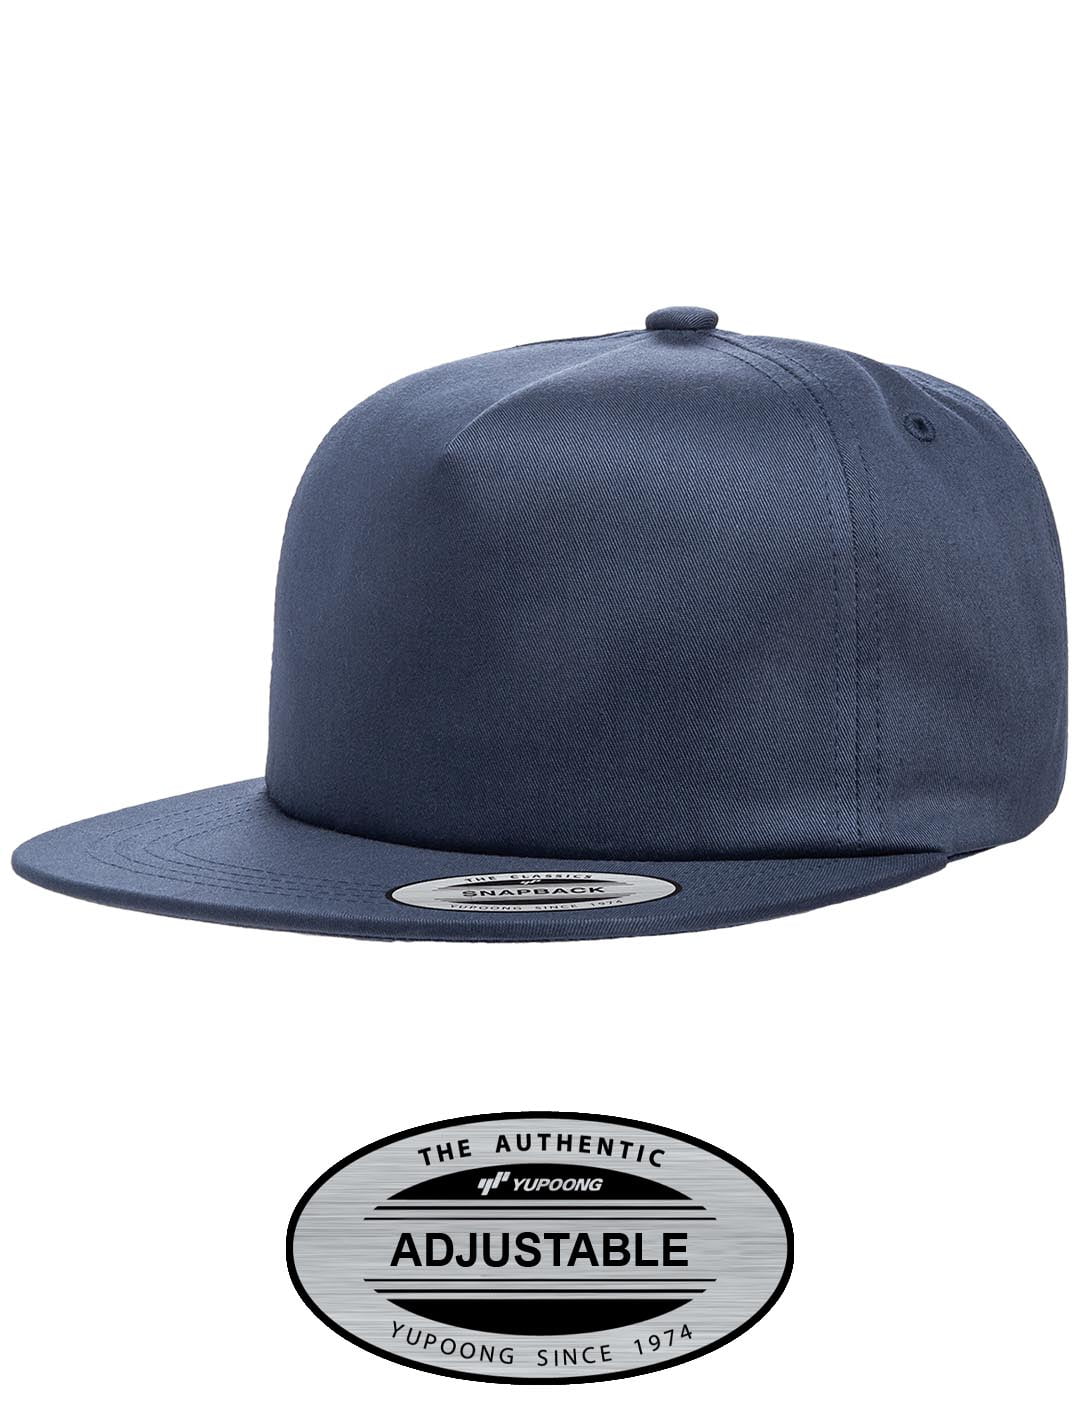 Yupoong Unstructured 5-Panel Snapback Cap #6502